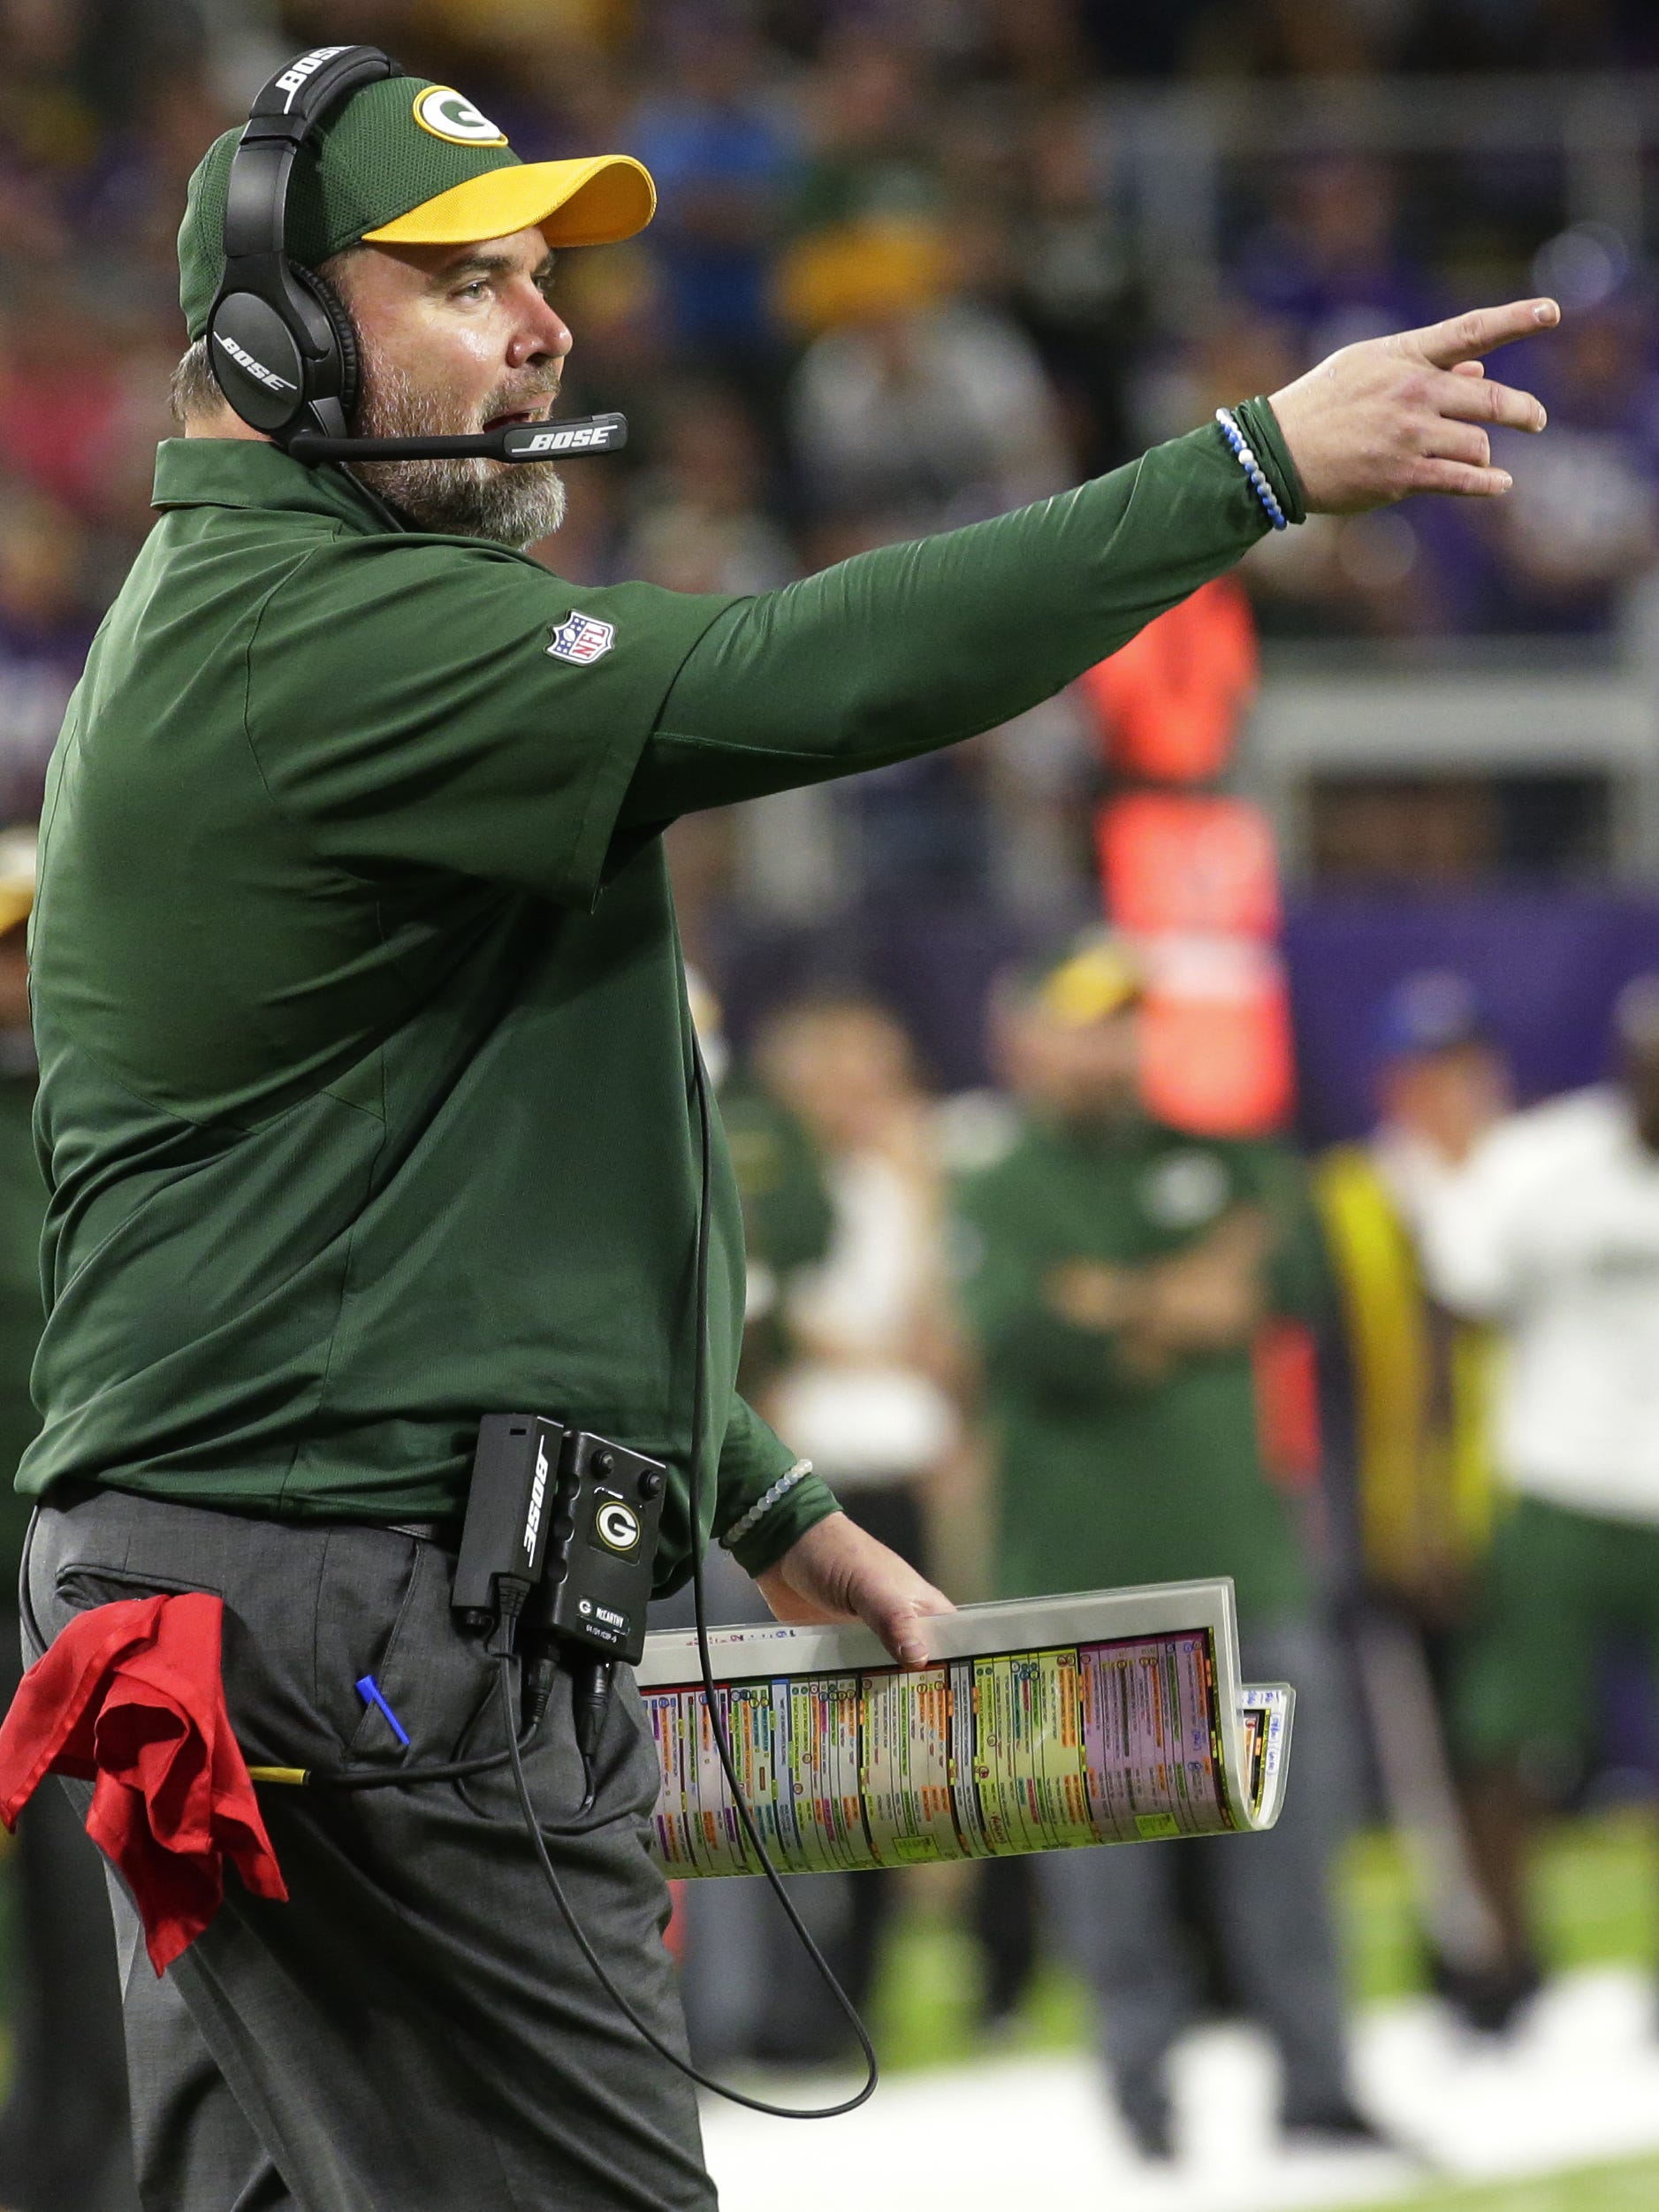 Green Bay Packers coach Mike McCarthy talks to officials after center JC Tretter was called for unsportsmanlike conduct during the fourth quarter on Sept. 18, 2016, at U.S. Bank Stadium in Minneapolis.